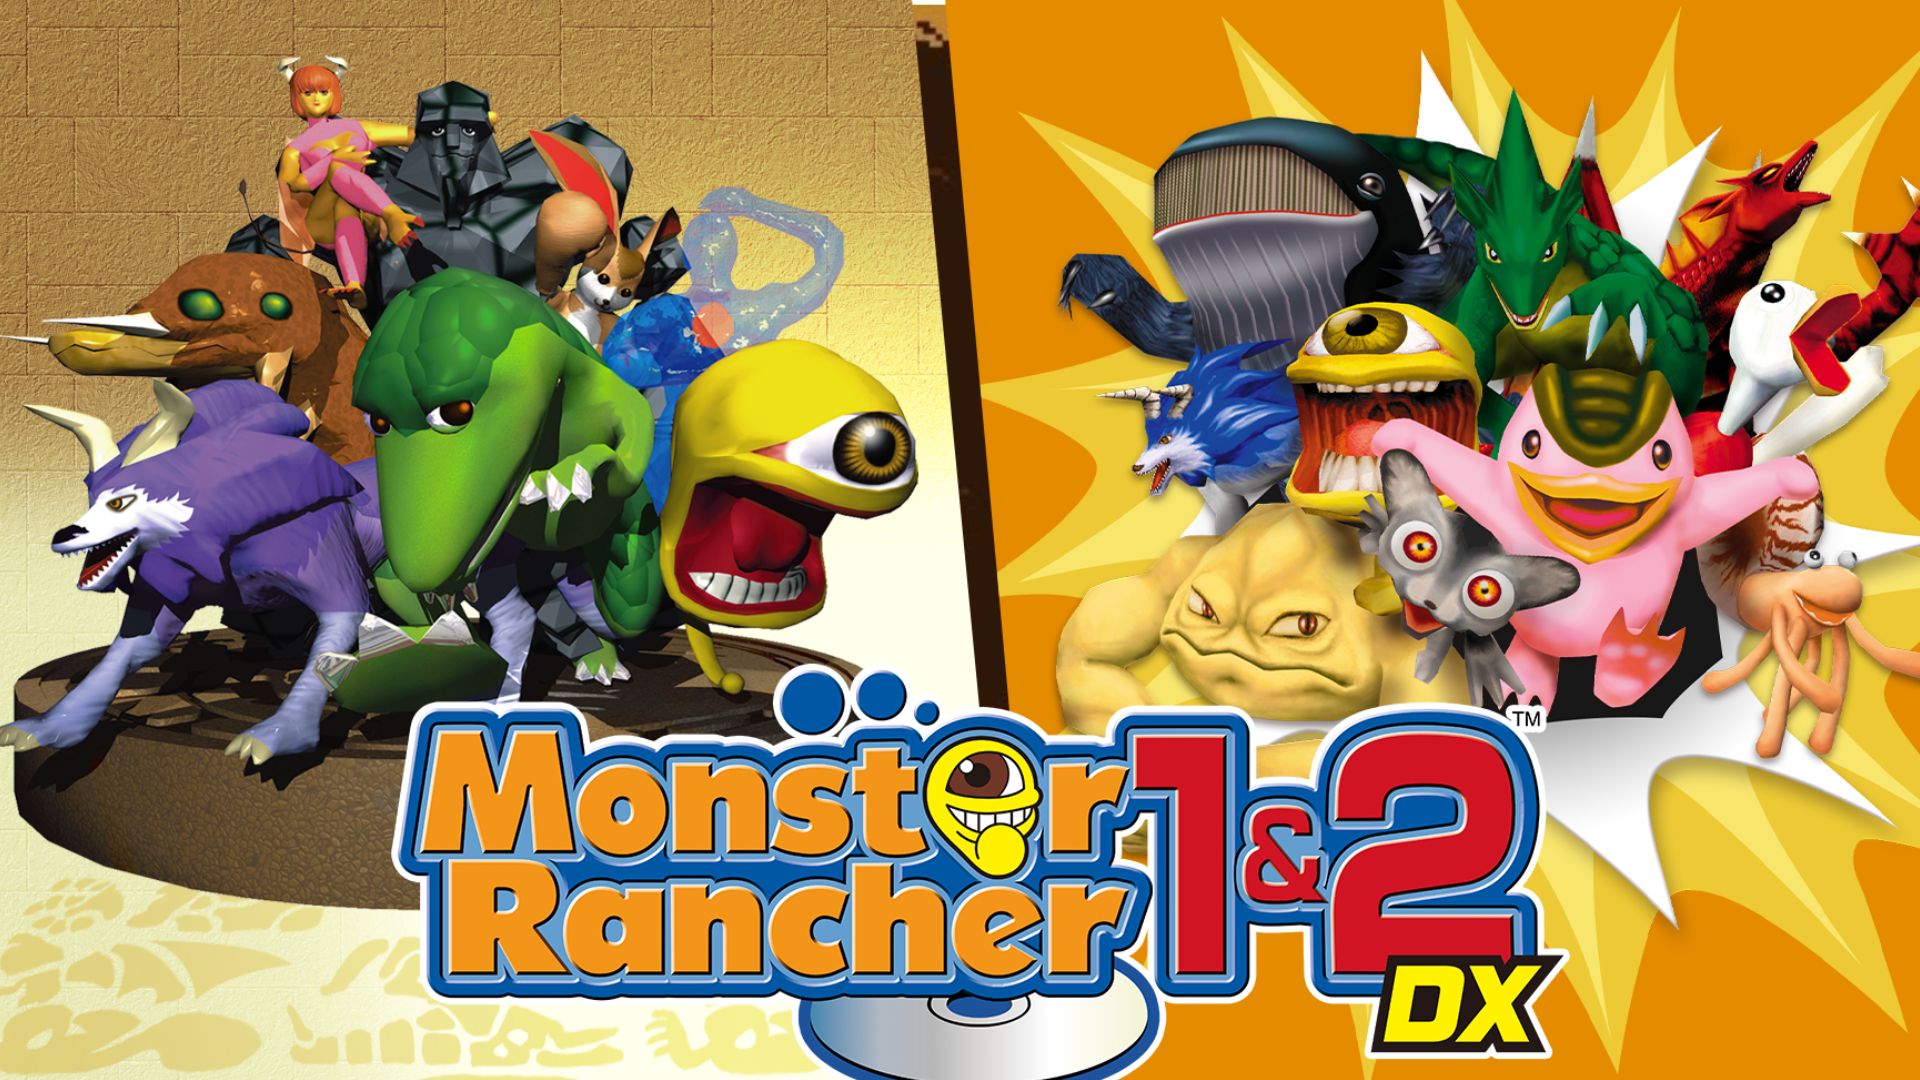 Best monster games: Monster Rancher 1 & 2 DX. Image shows the game's logo with various wacky monsters behind it.